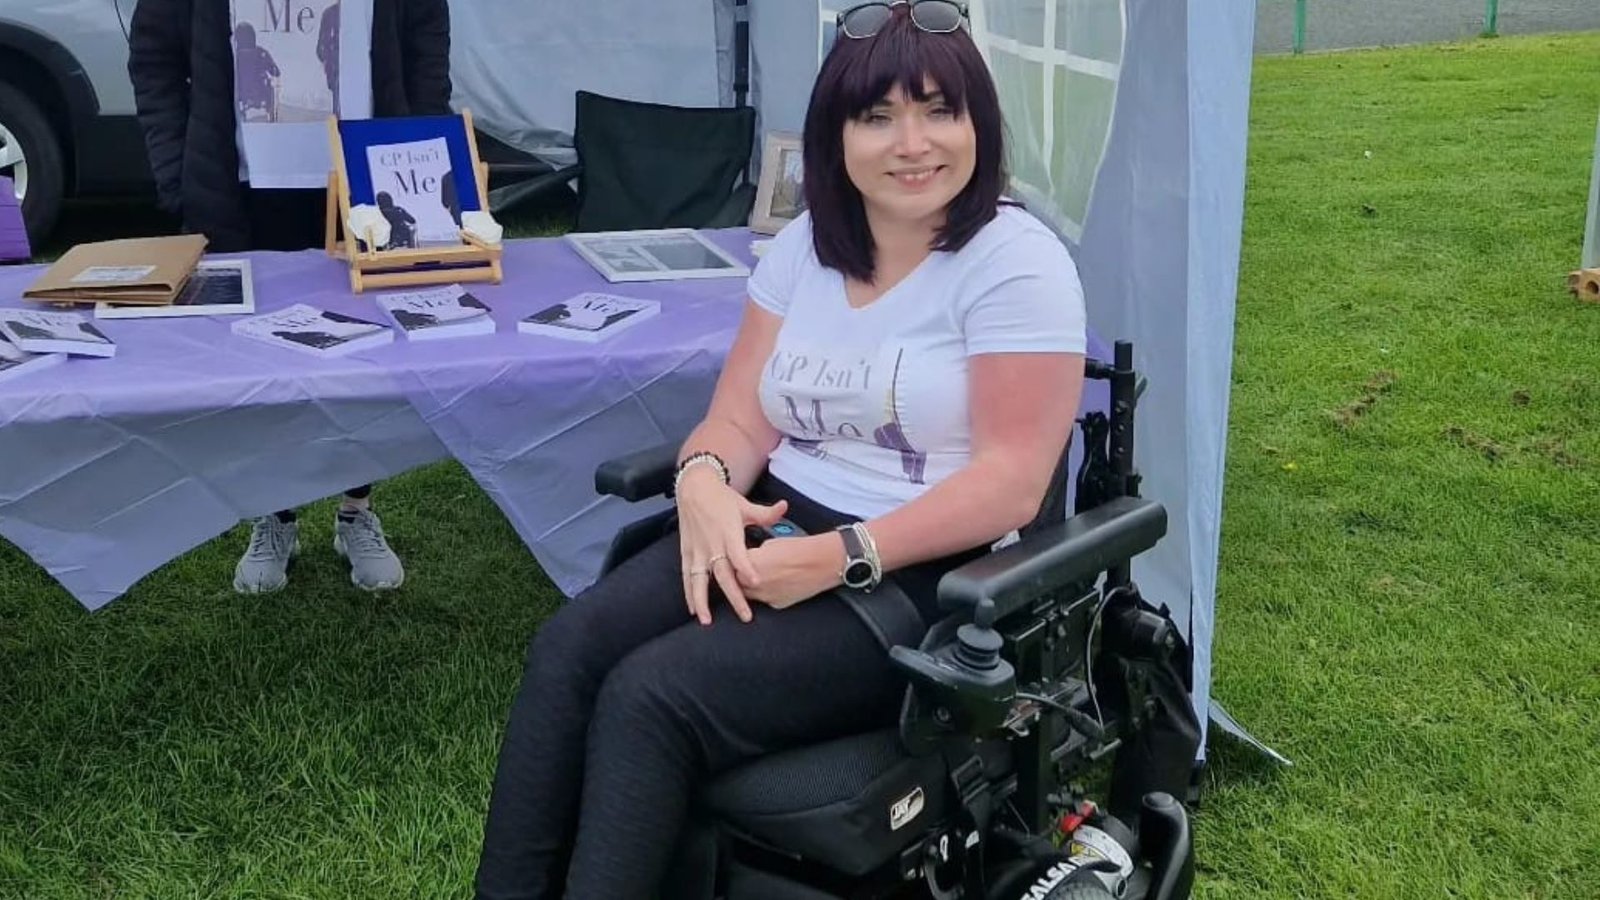 A picture of Samantha Maxwell in her power wheelchair smiling in front of a table.